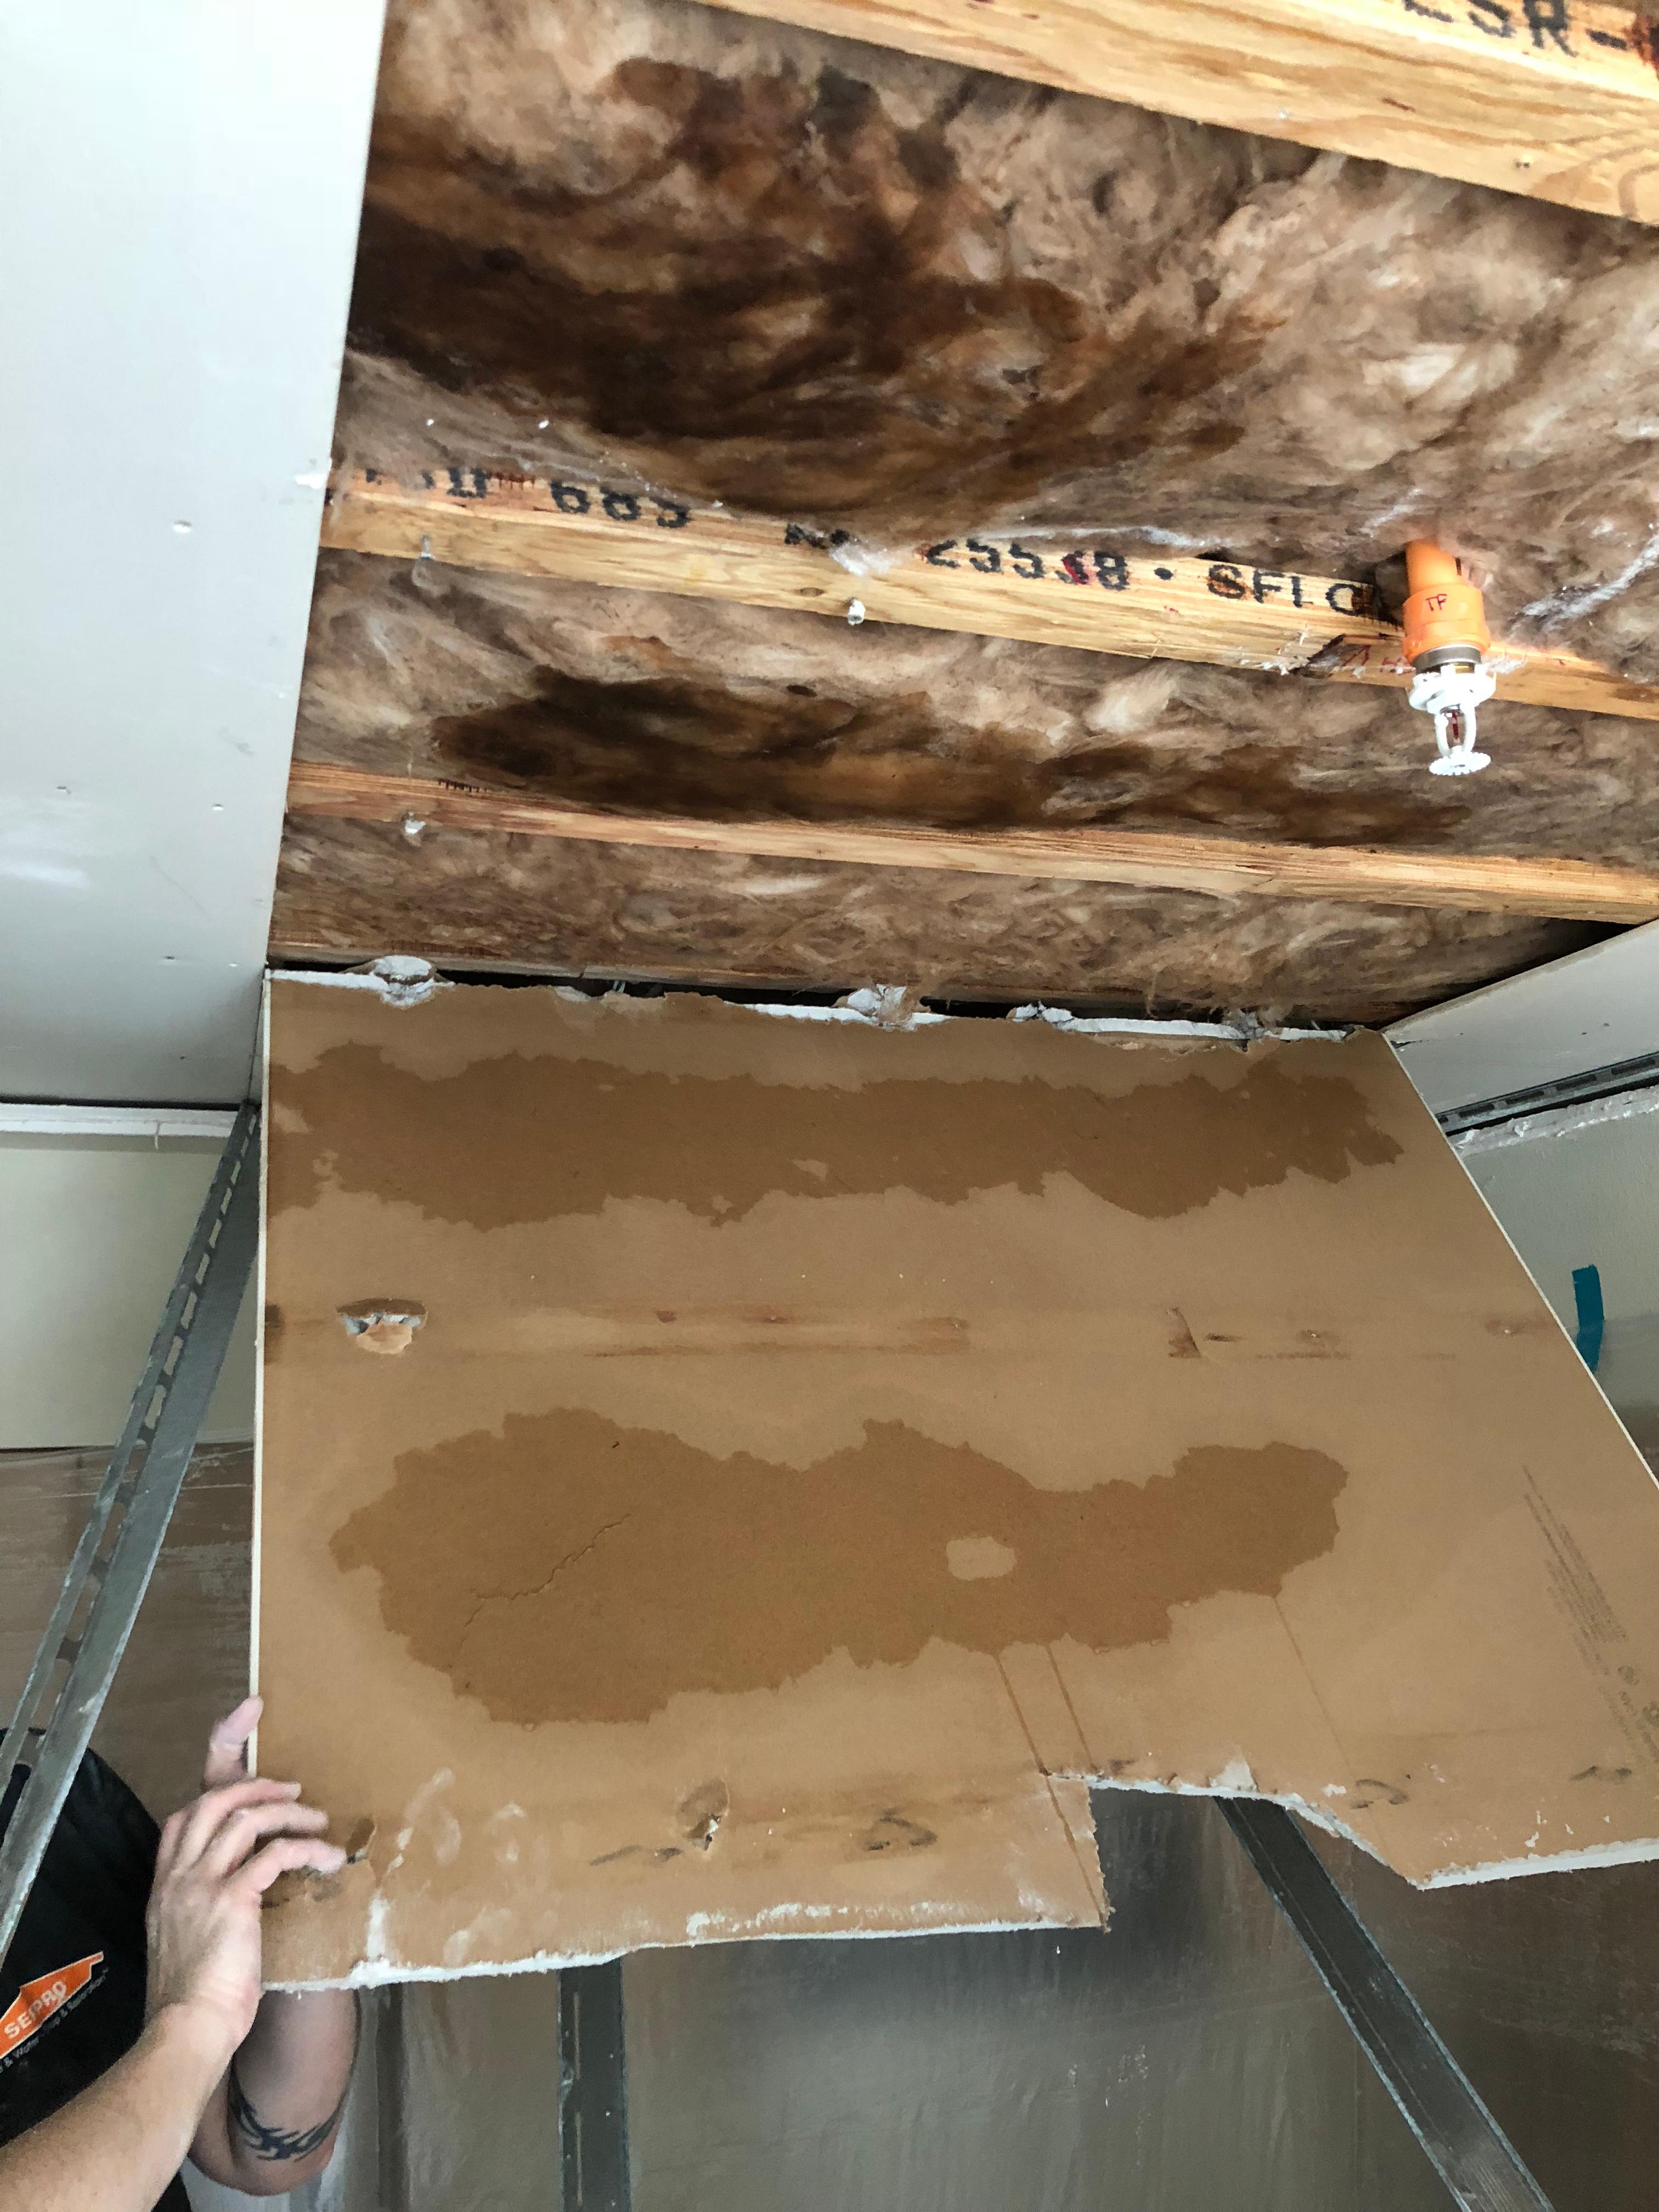 This ceiling in a Woodinville, WA home suffered from a water leak that caused extensive water damage and mold damage.